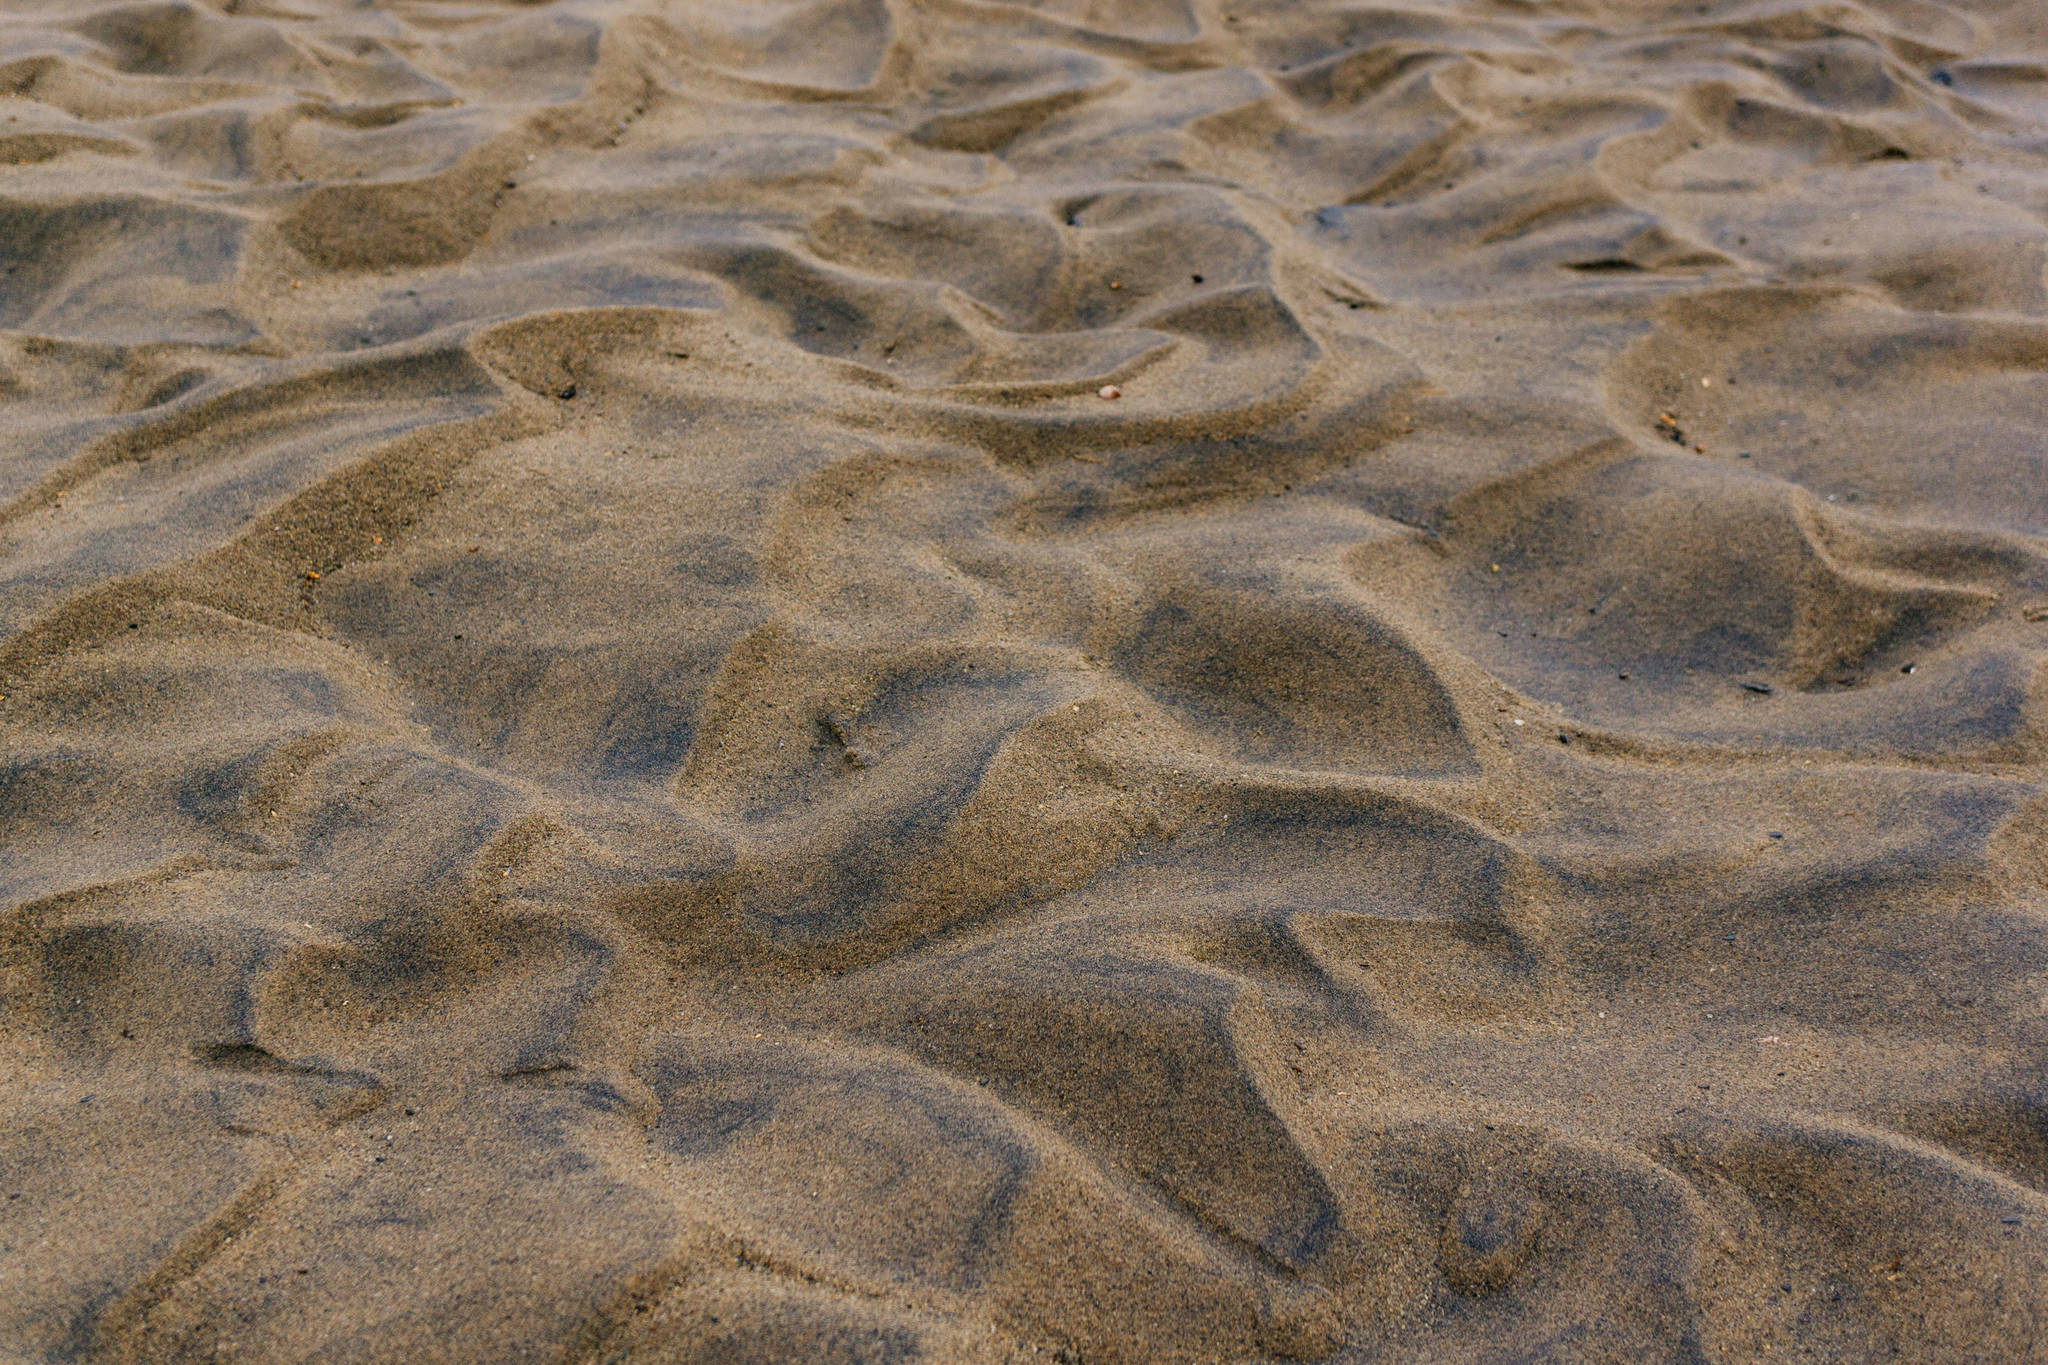 Waves in the sand texture. (Photo by Gabe Donohoe)